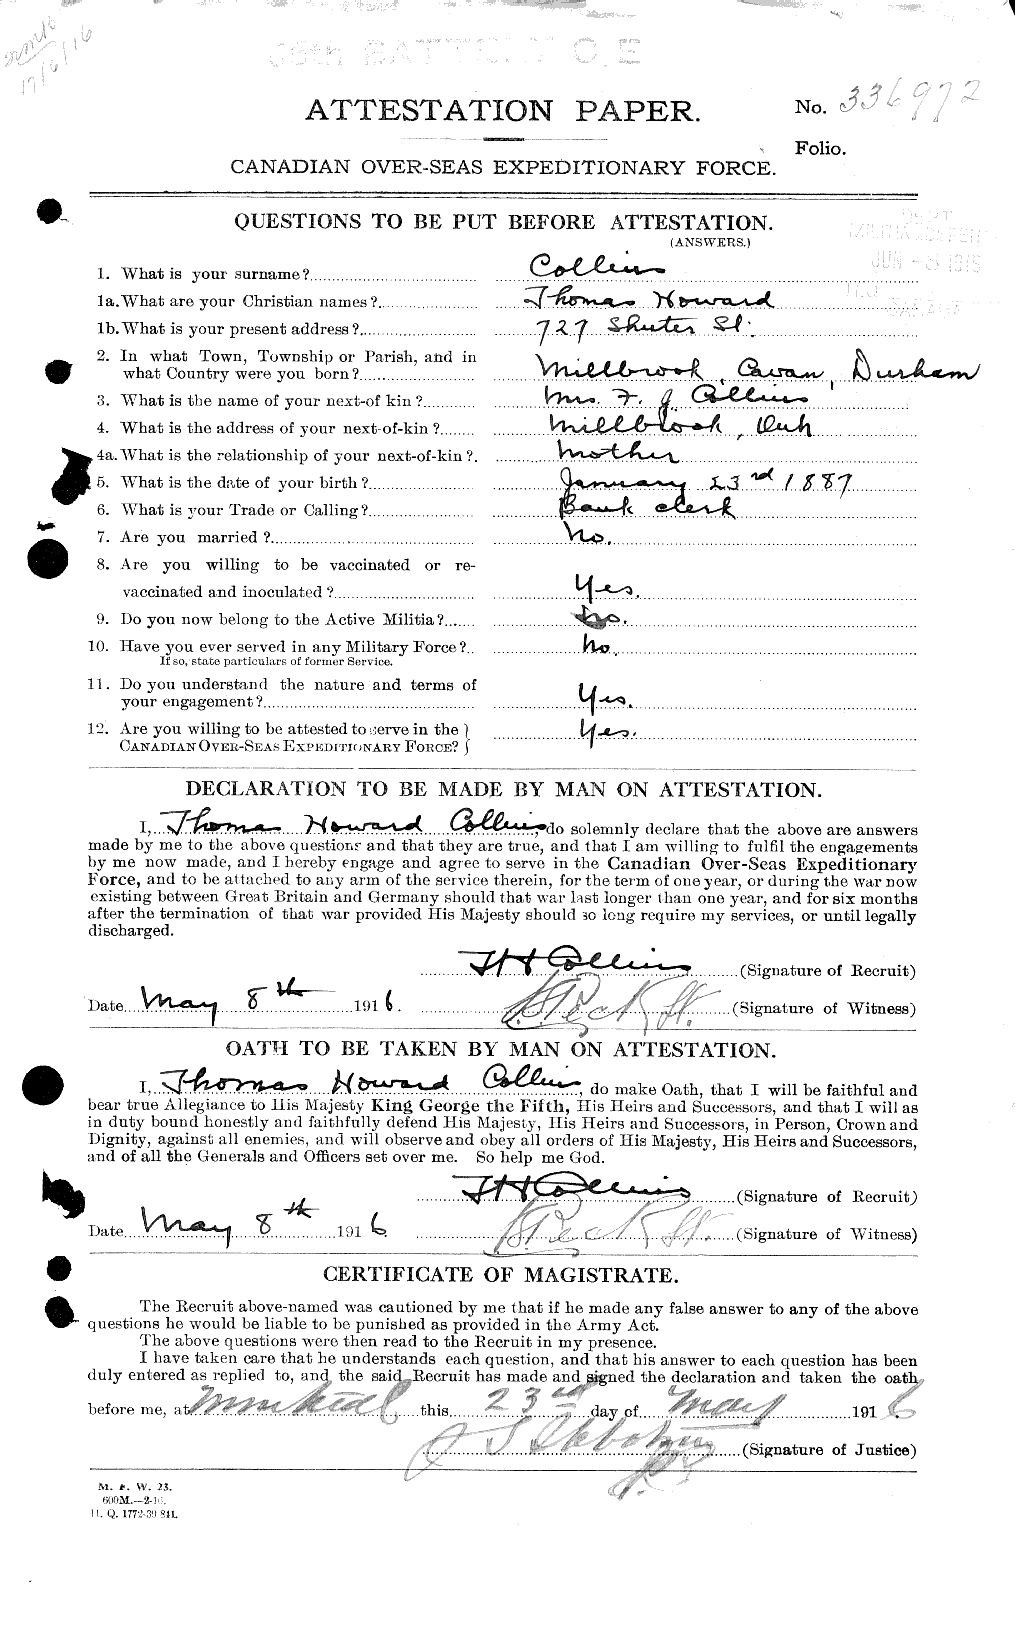 Personnel Records of the First World War - CEF 034586a